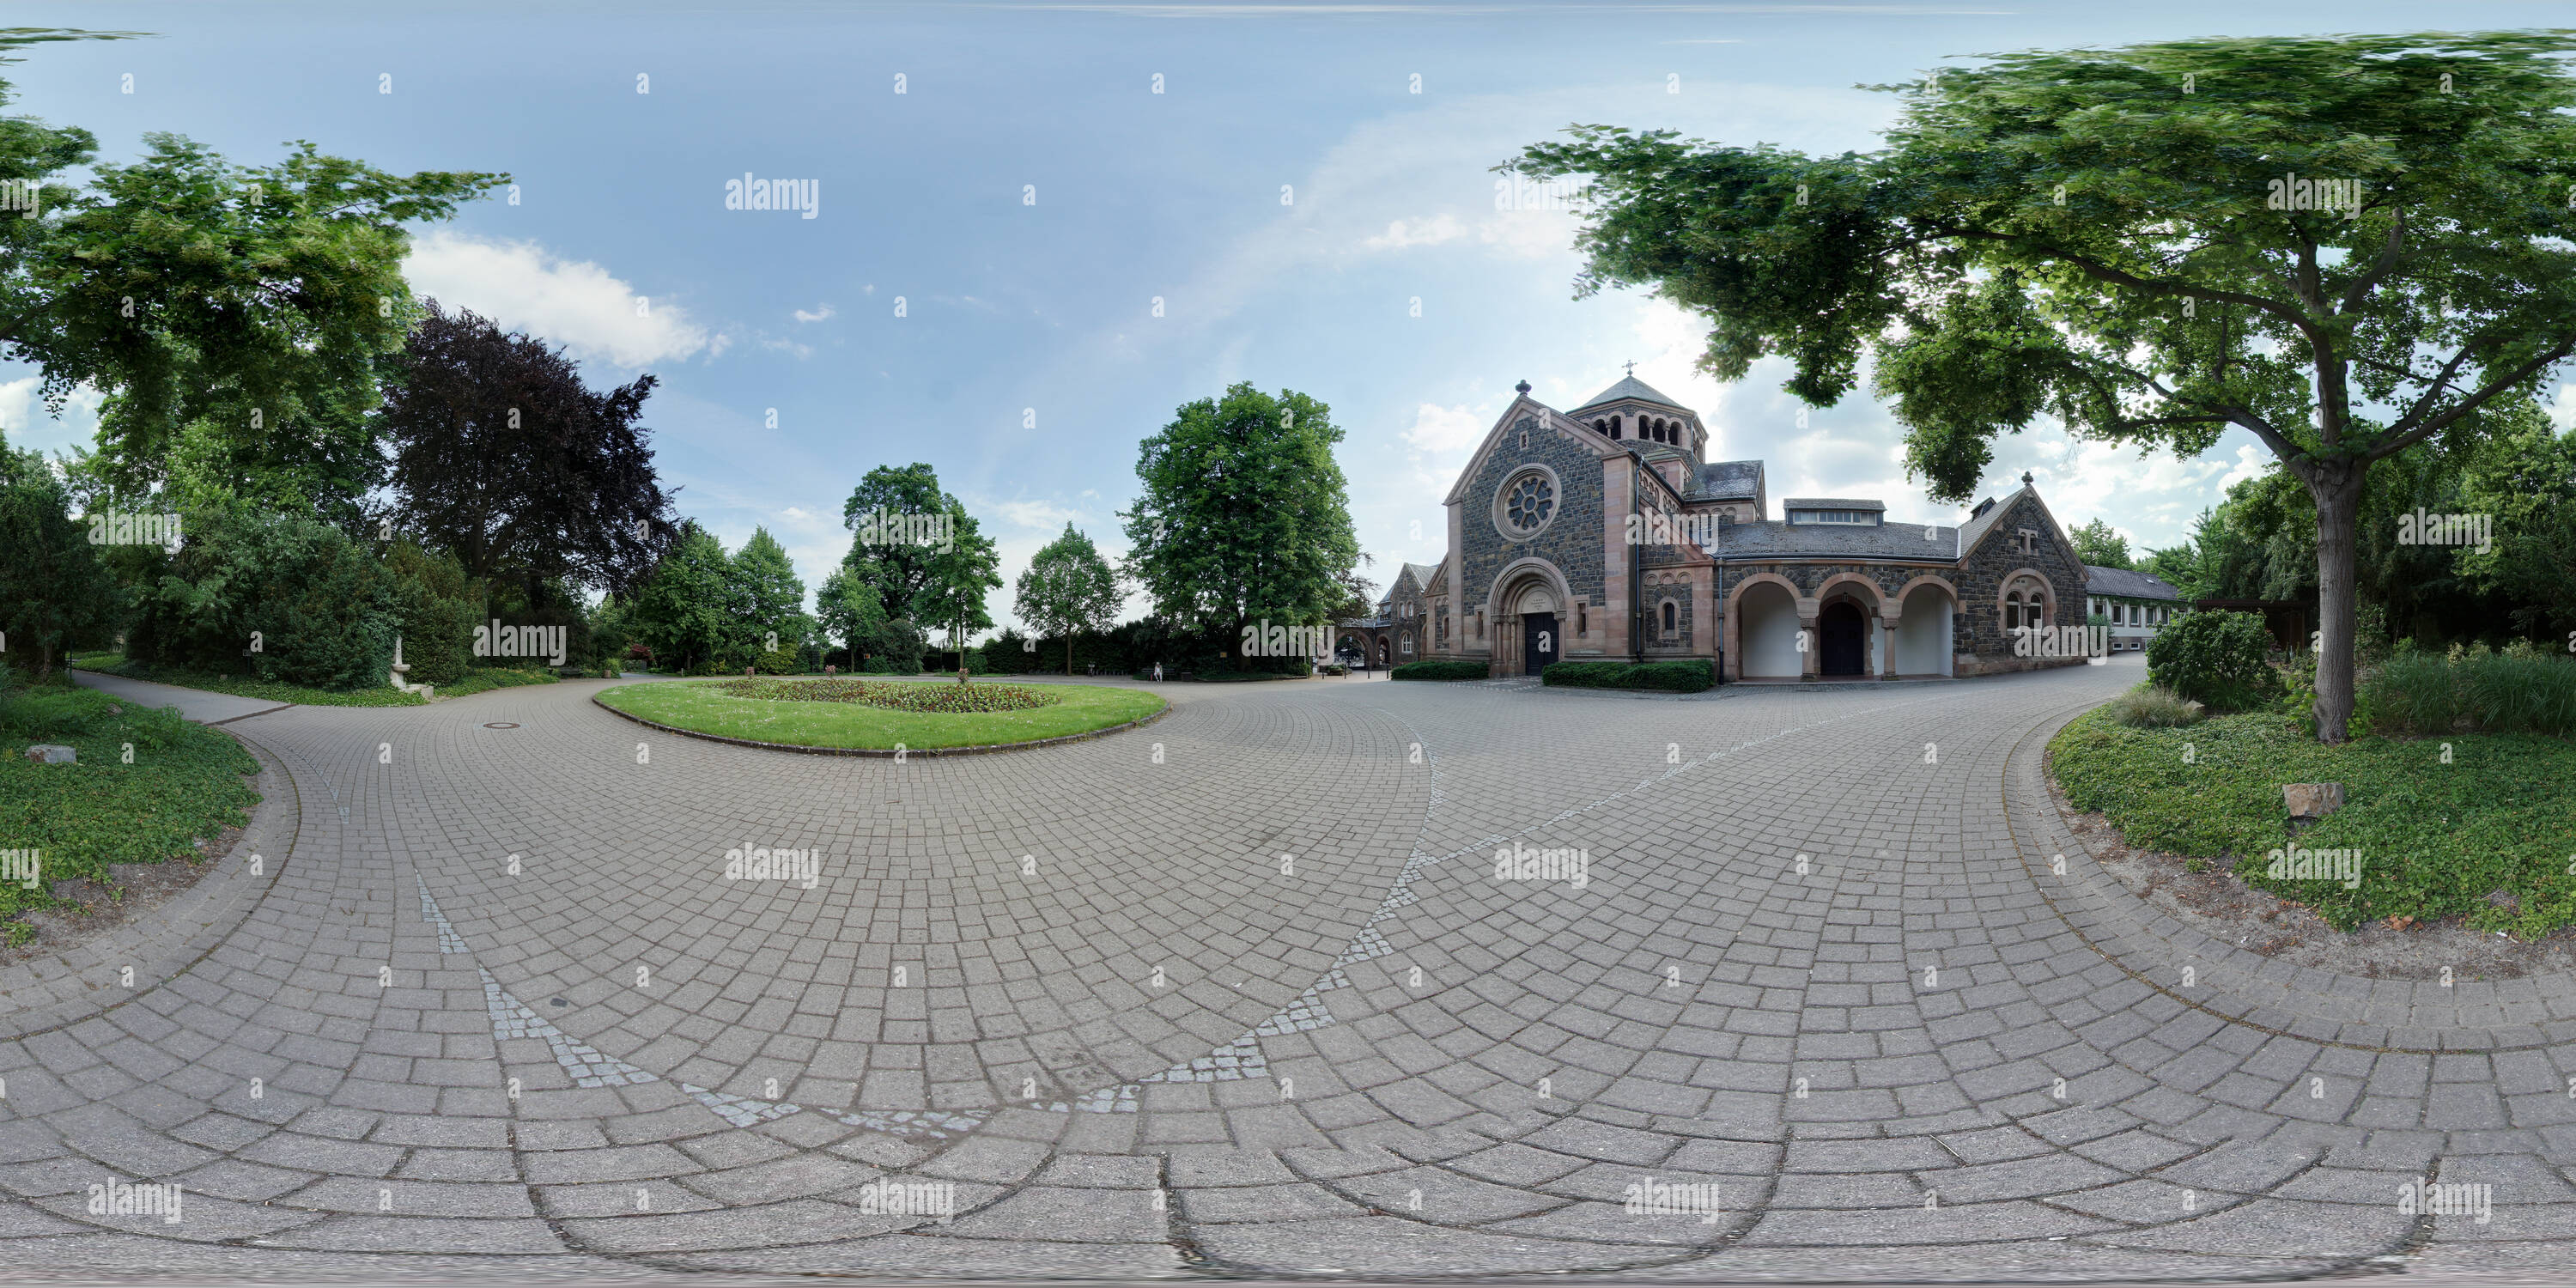 360 degree panoramic view of Main Cemetery Worms, Hochheimer Höhe, Cemetery Chapel, 2017-05